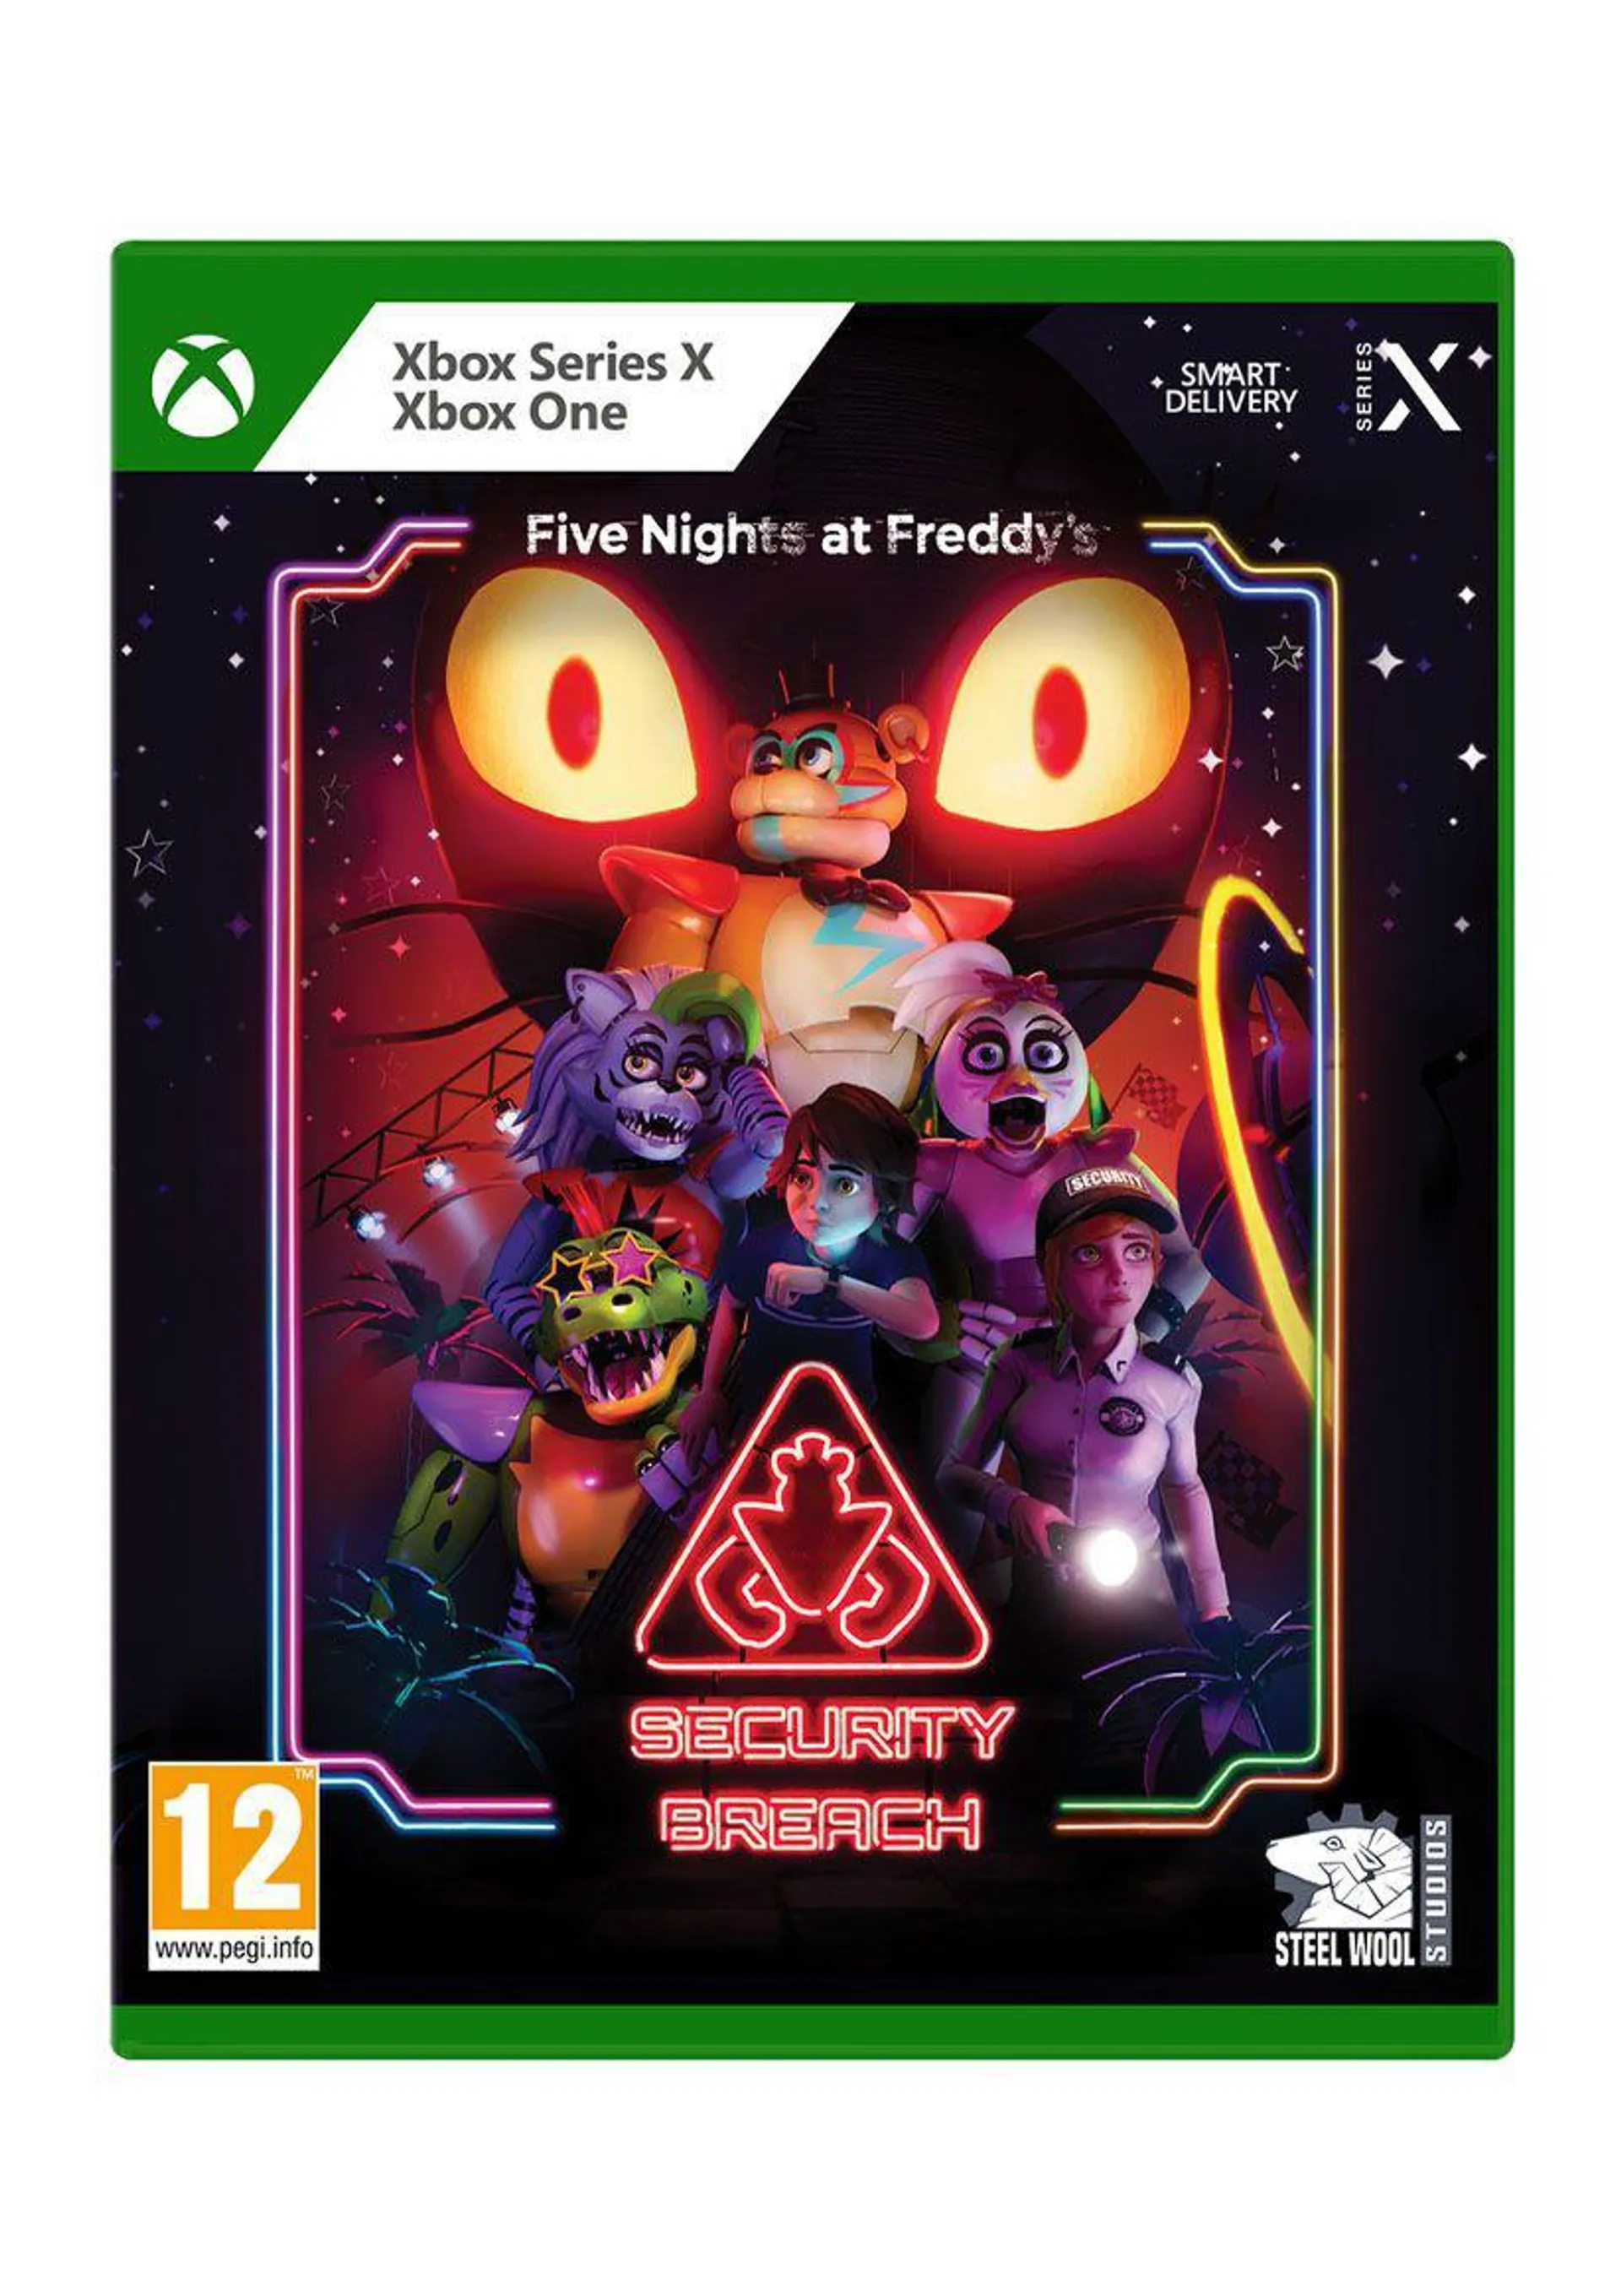 Five Nights at Freddy's: Security Breach (XSX/XB1) on Xbox Series X | S